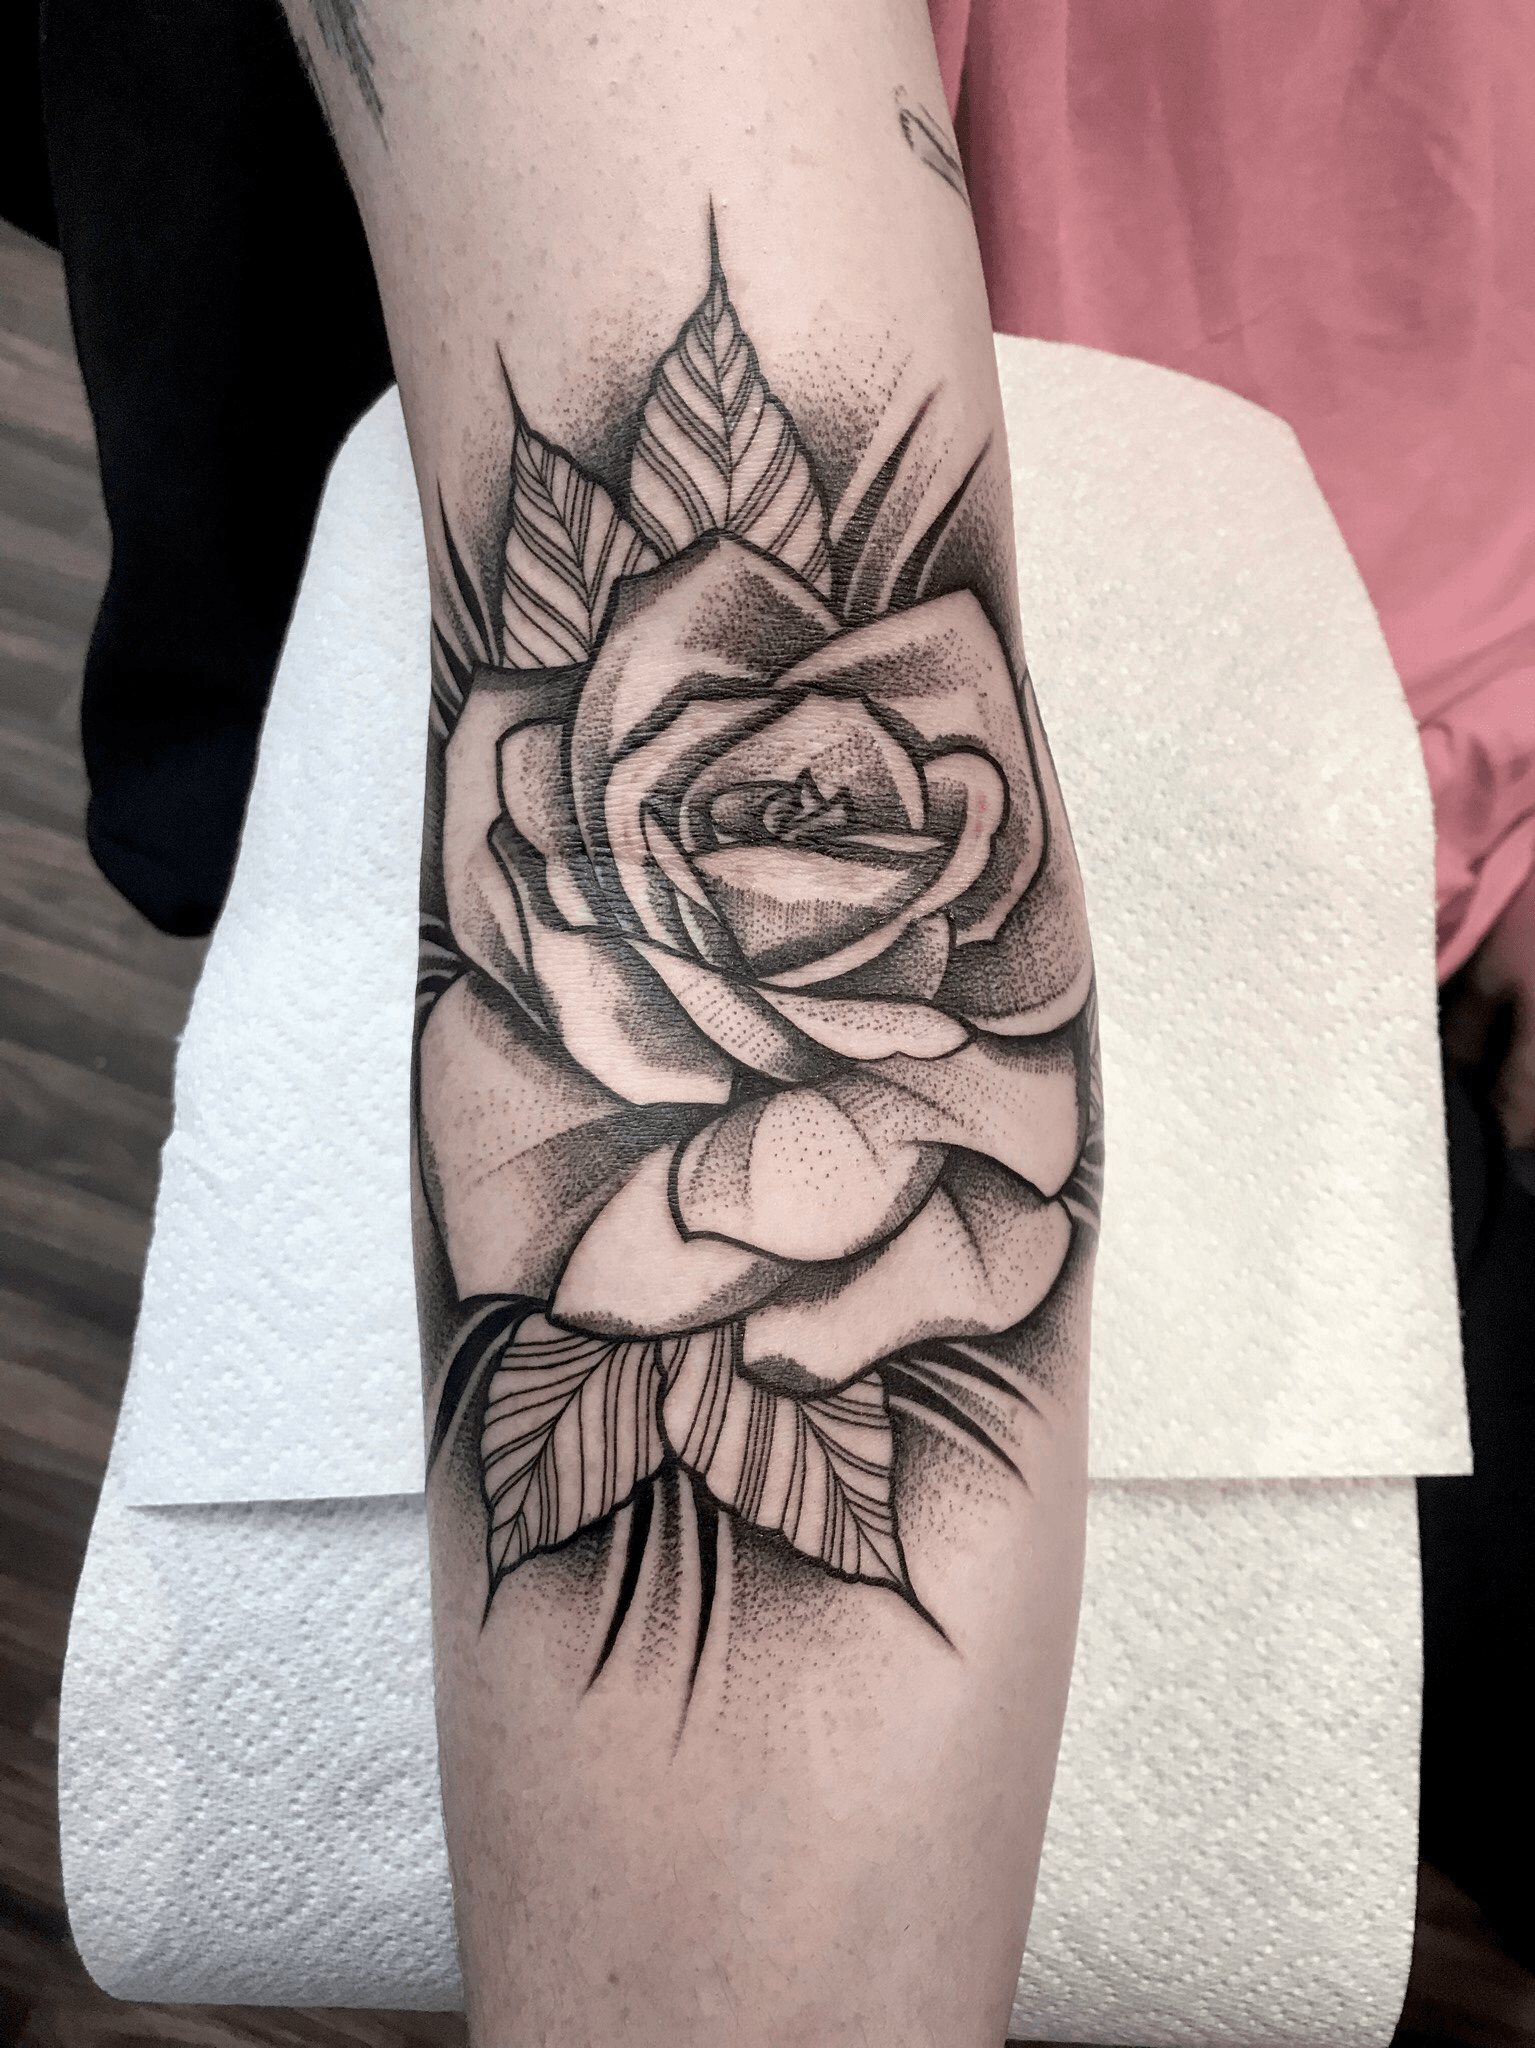 Harry Styles Gets Rose Tattoo on His Elbow